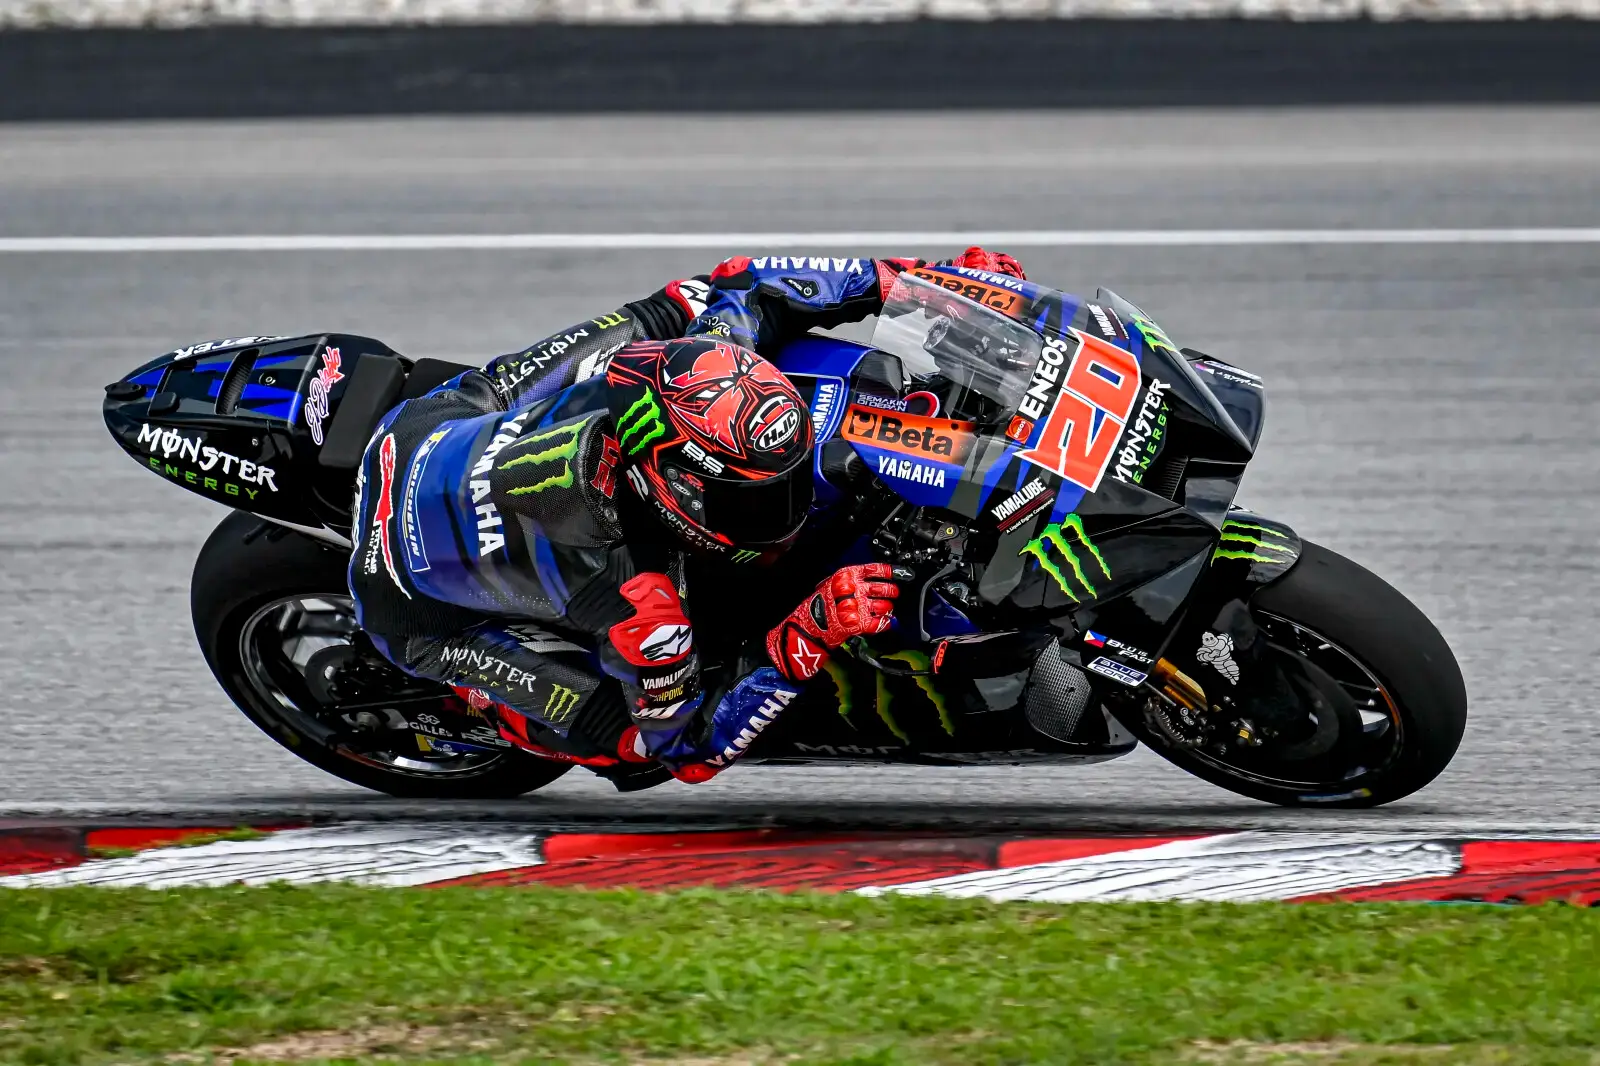 Win a MotoGP Silverstone Experience with Monster Energy